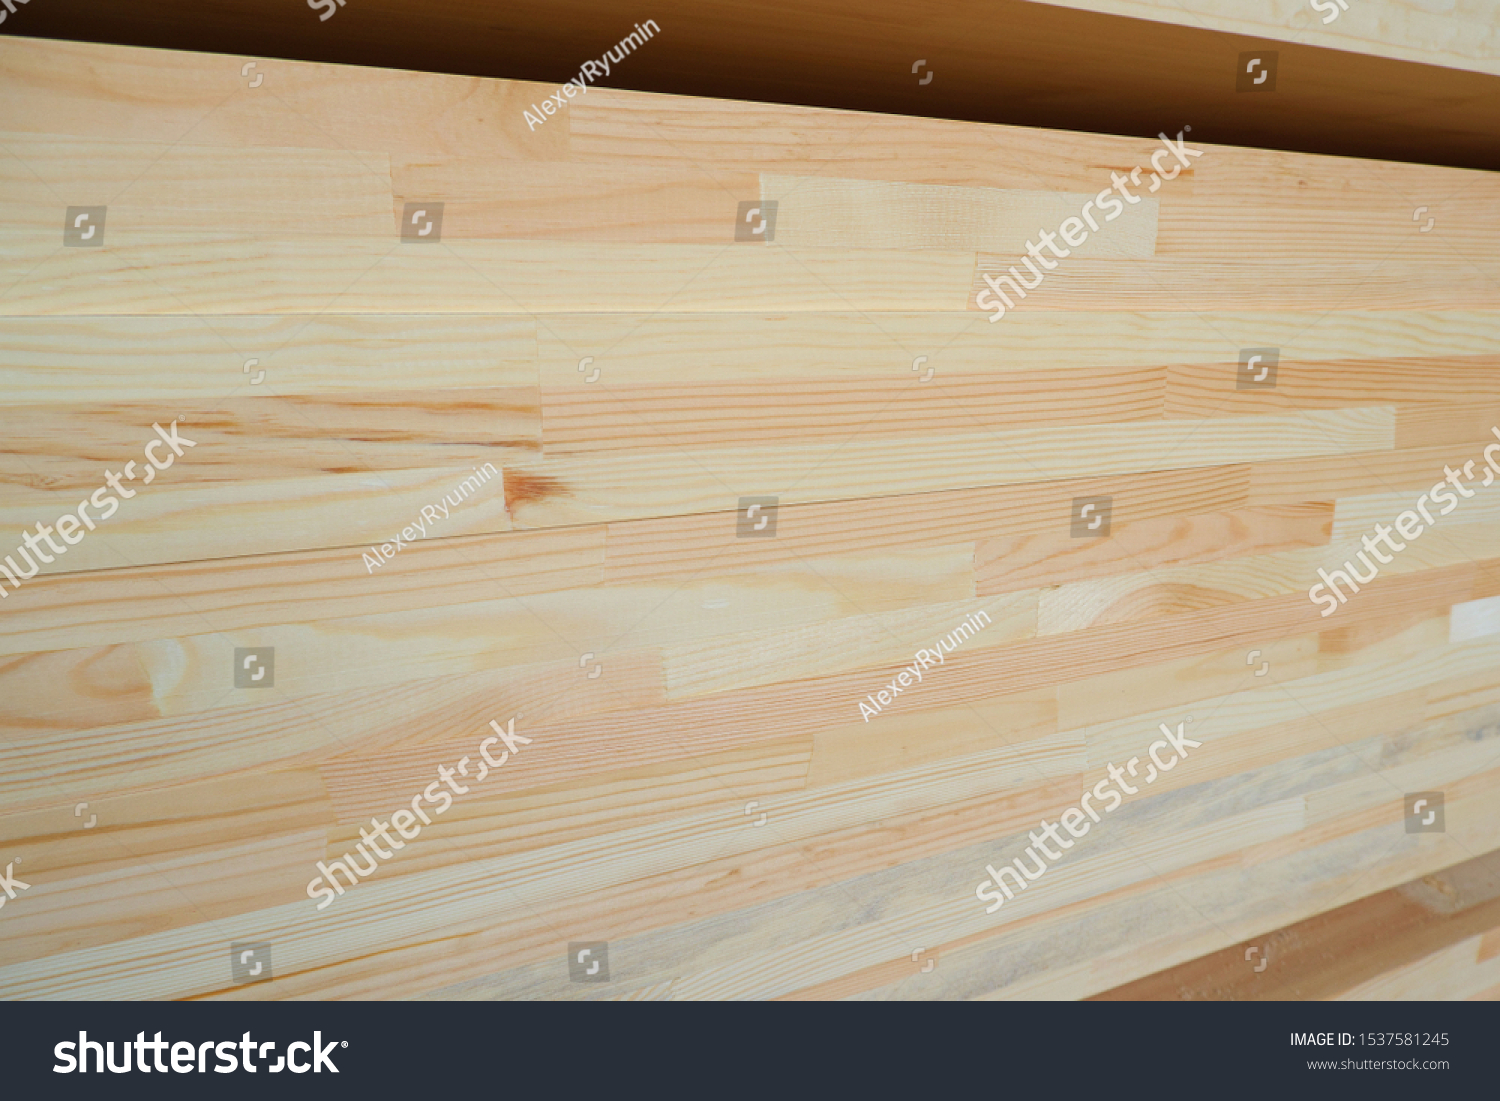 Side view of stack of three-layer wooden glued laminated timber beams from pine finger joint spliced boards for wooden windows